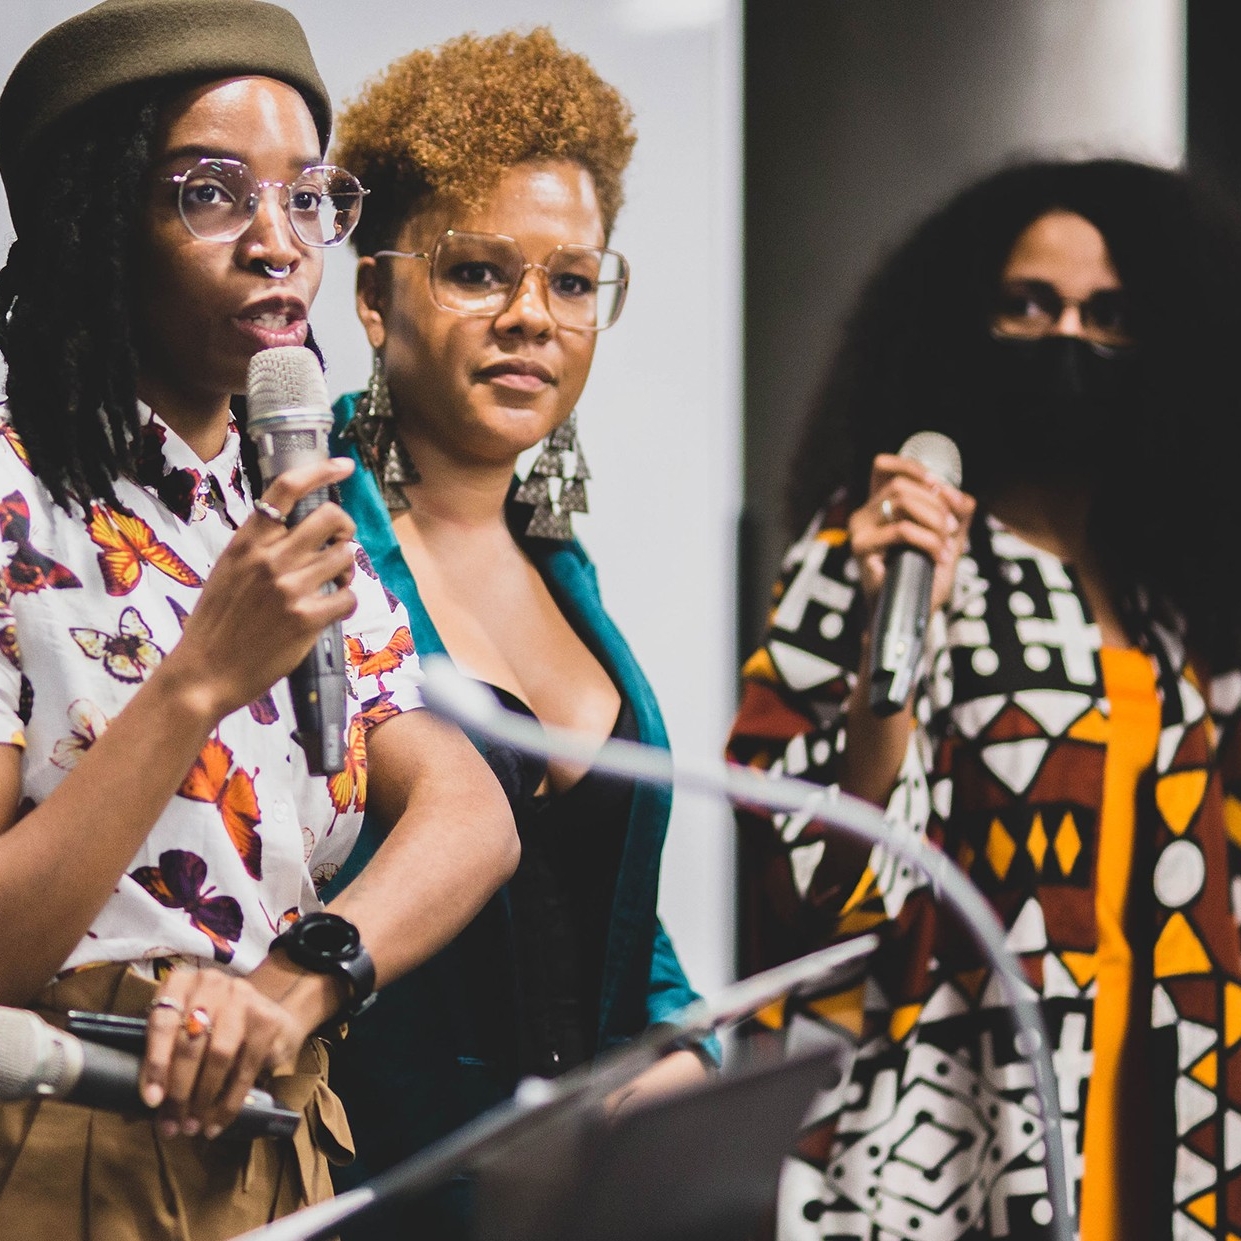 Photo of three Black women holding microphones giving a presentation